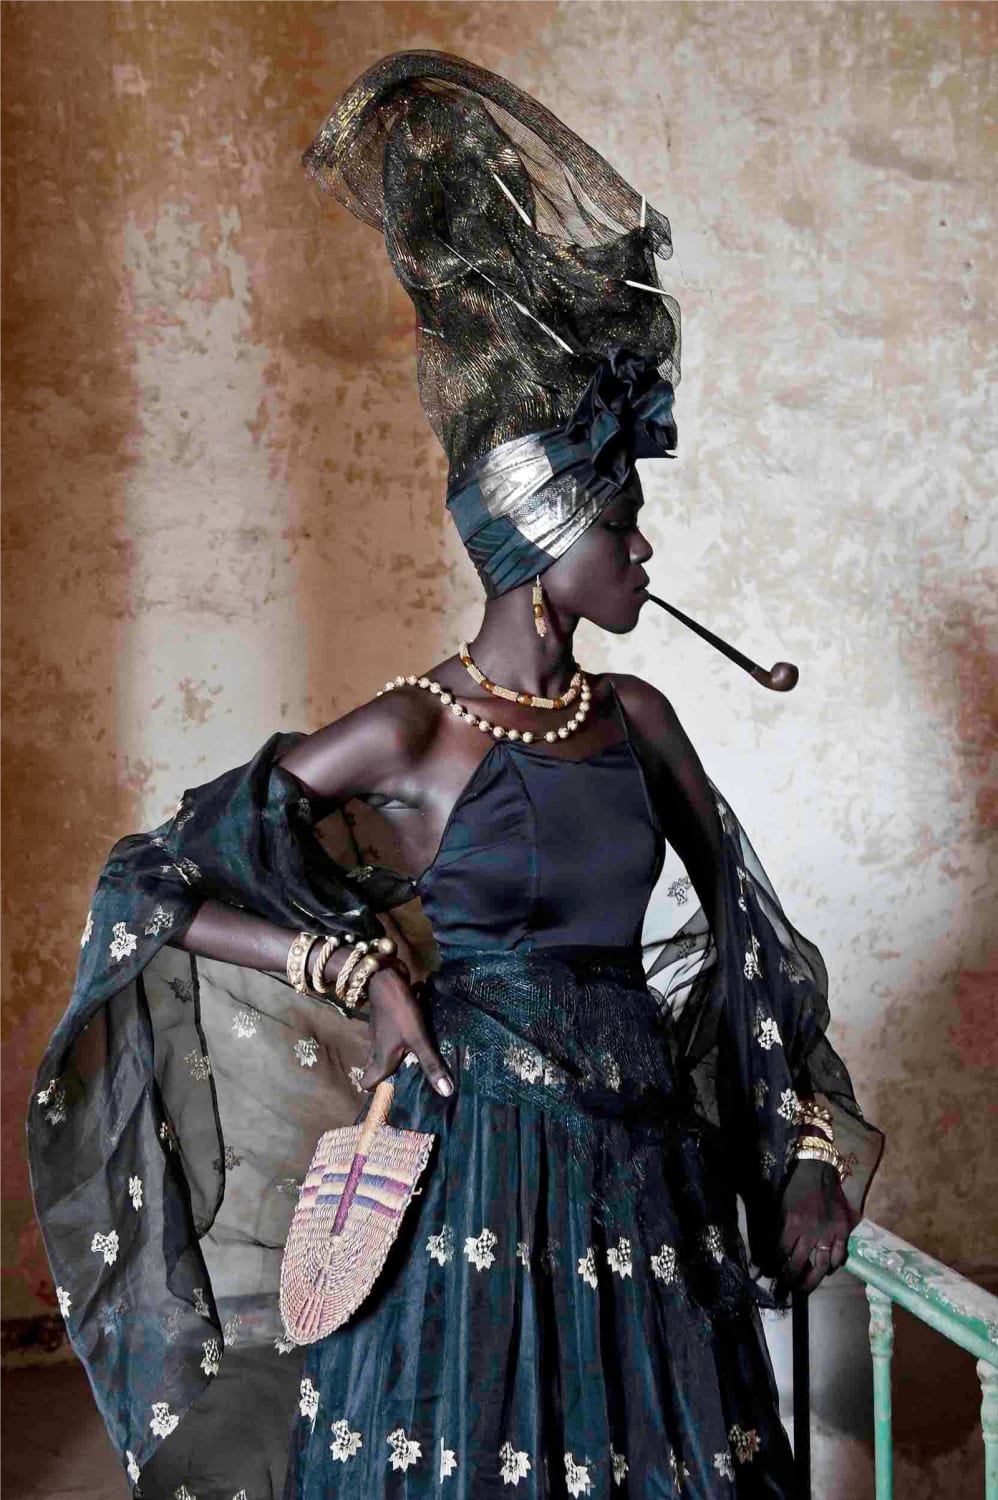 In Senegal, Female Empowerment, Prestige and Wealth Is Measured in Glittering Gold